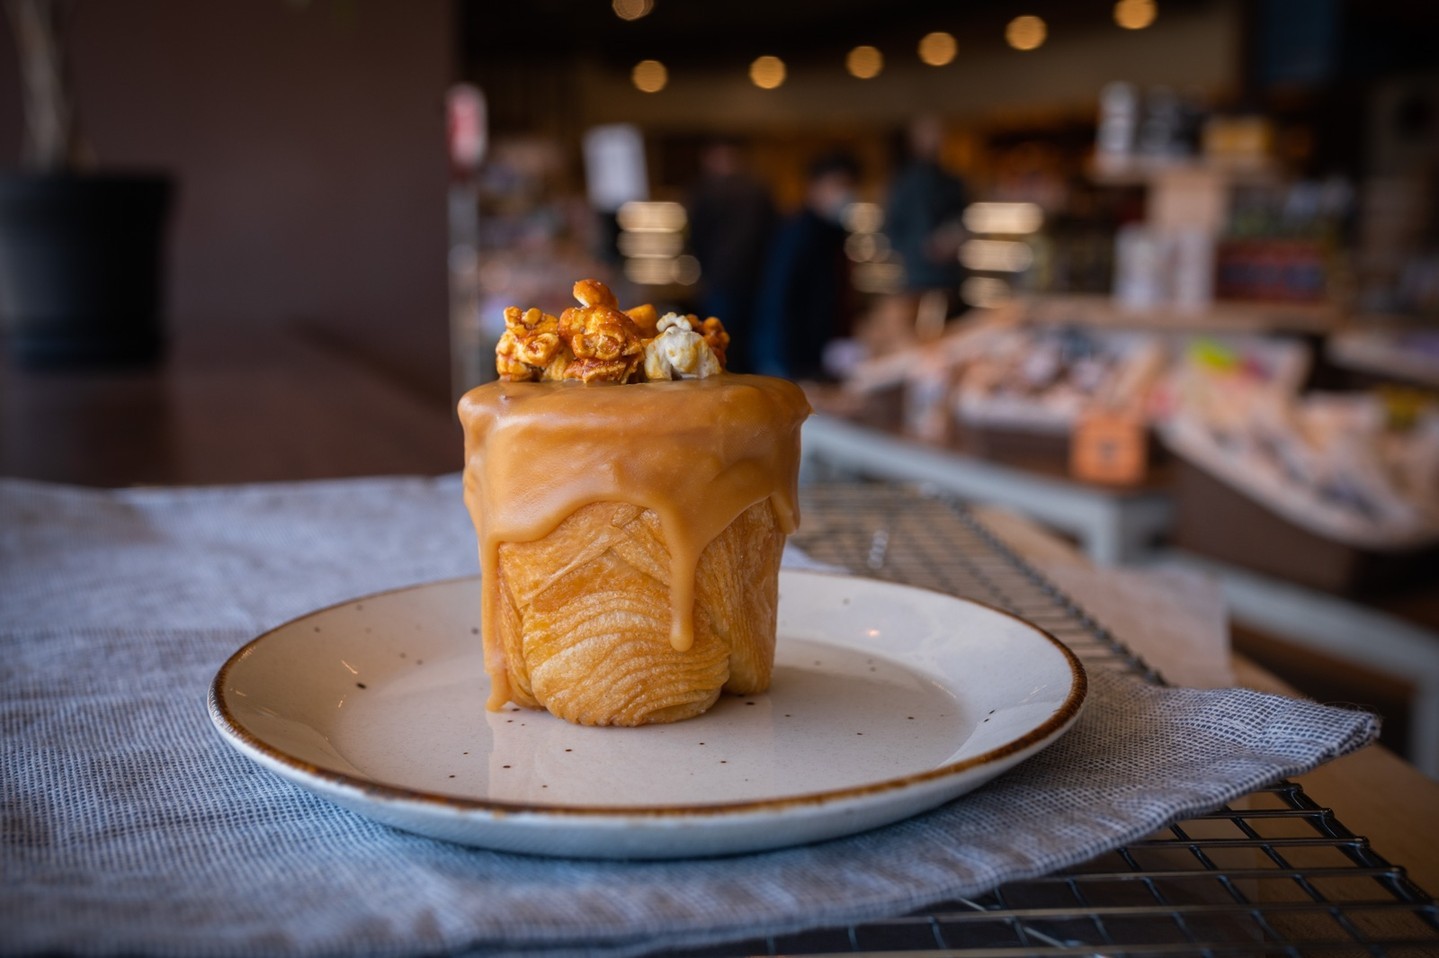 Have you tried our Caramel Popcorn Cruffin yet? Soft caramel covering a light, melt-in-your-mouth pastry, and topped with caramel popcorn. ⁠
⁠
Only available until May 28.